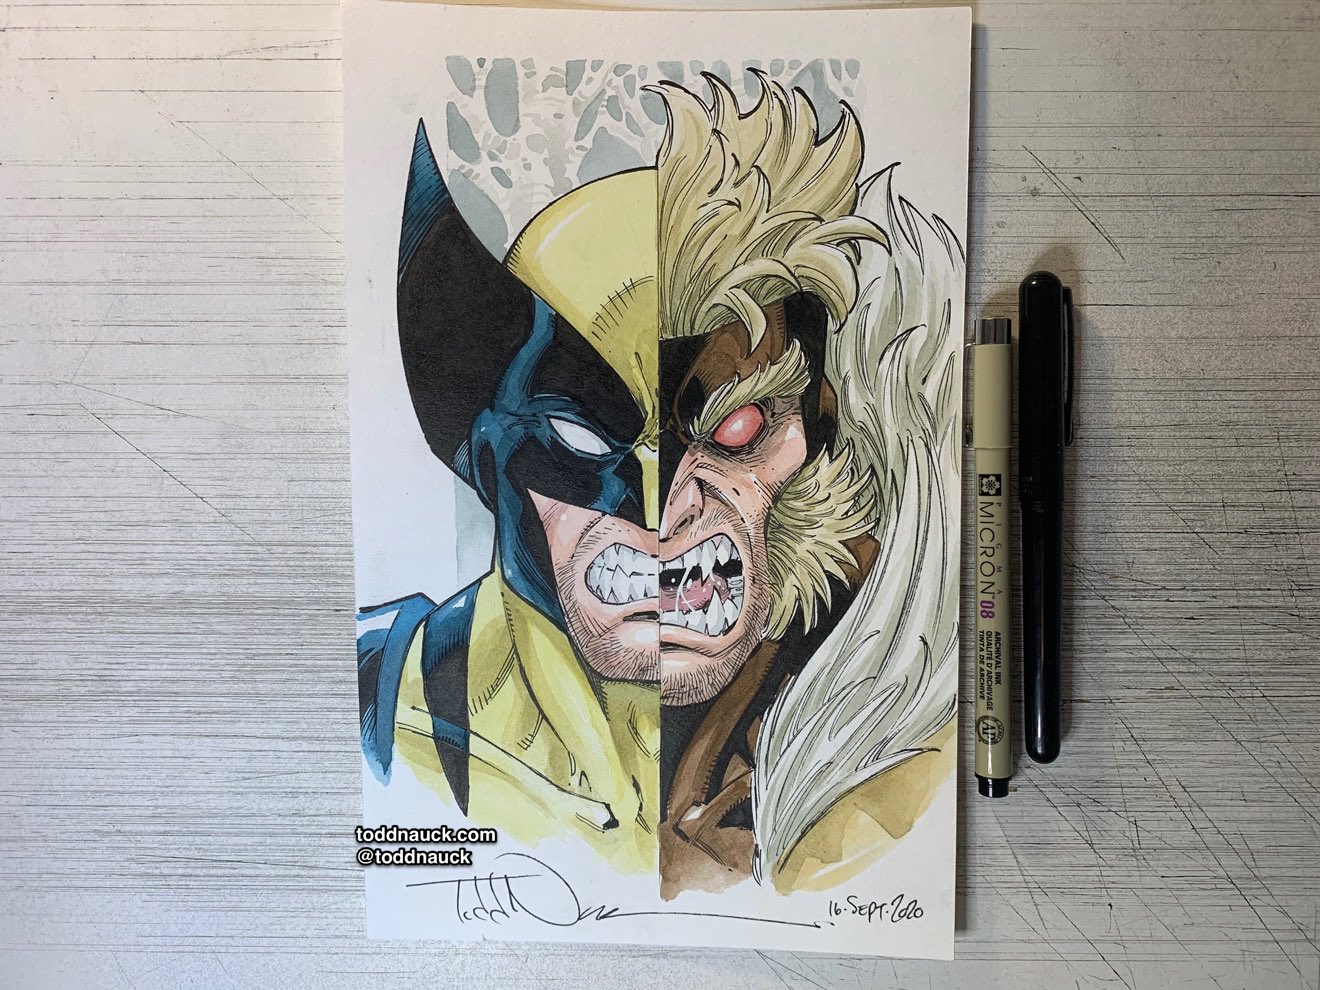 Art of Todd Nauck — Rogue, X-Men Pigma Micron colored pens and